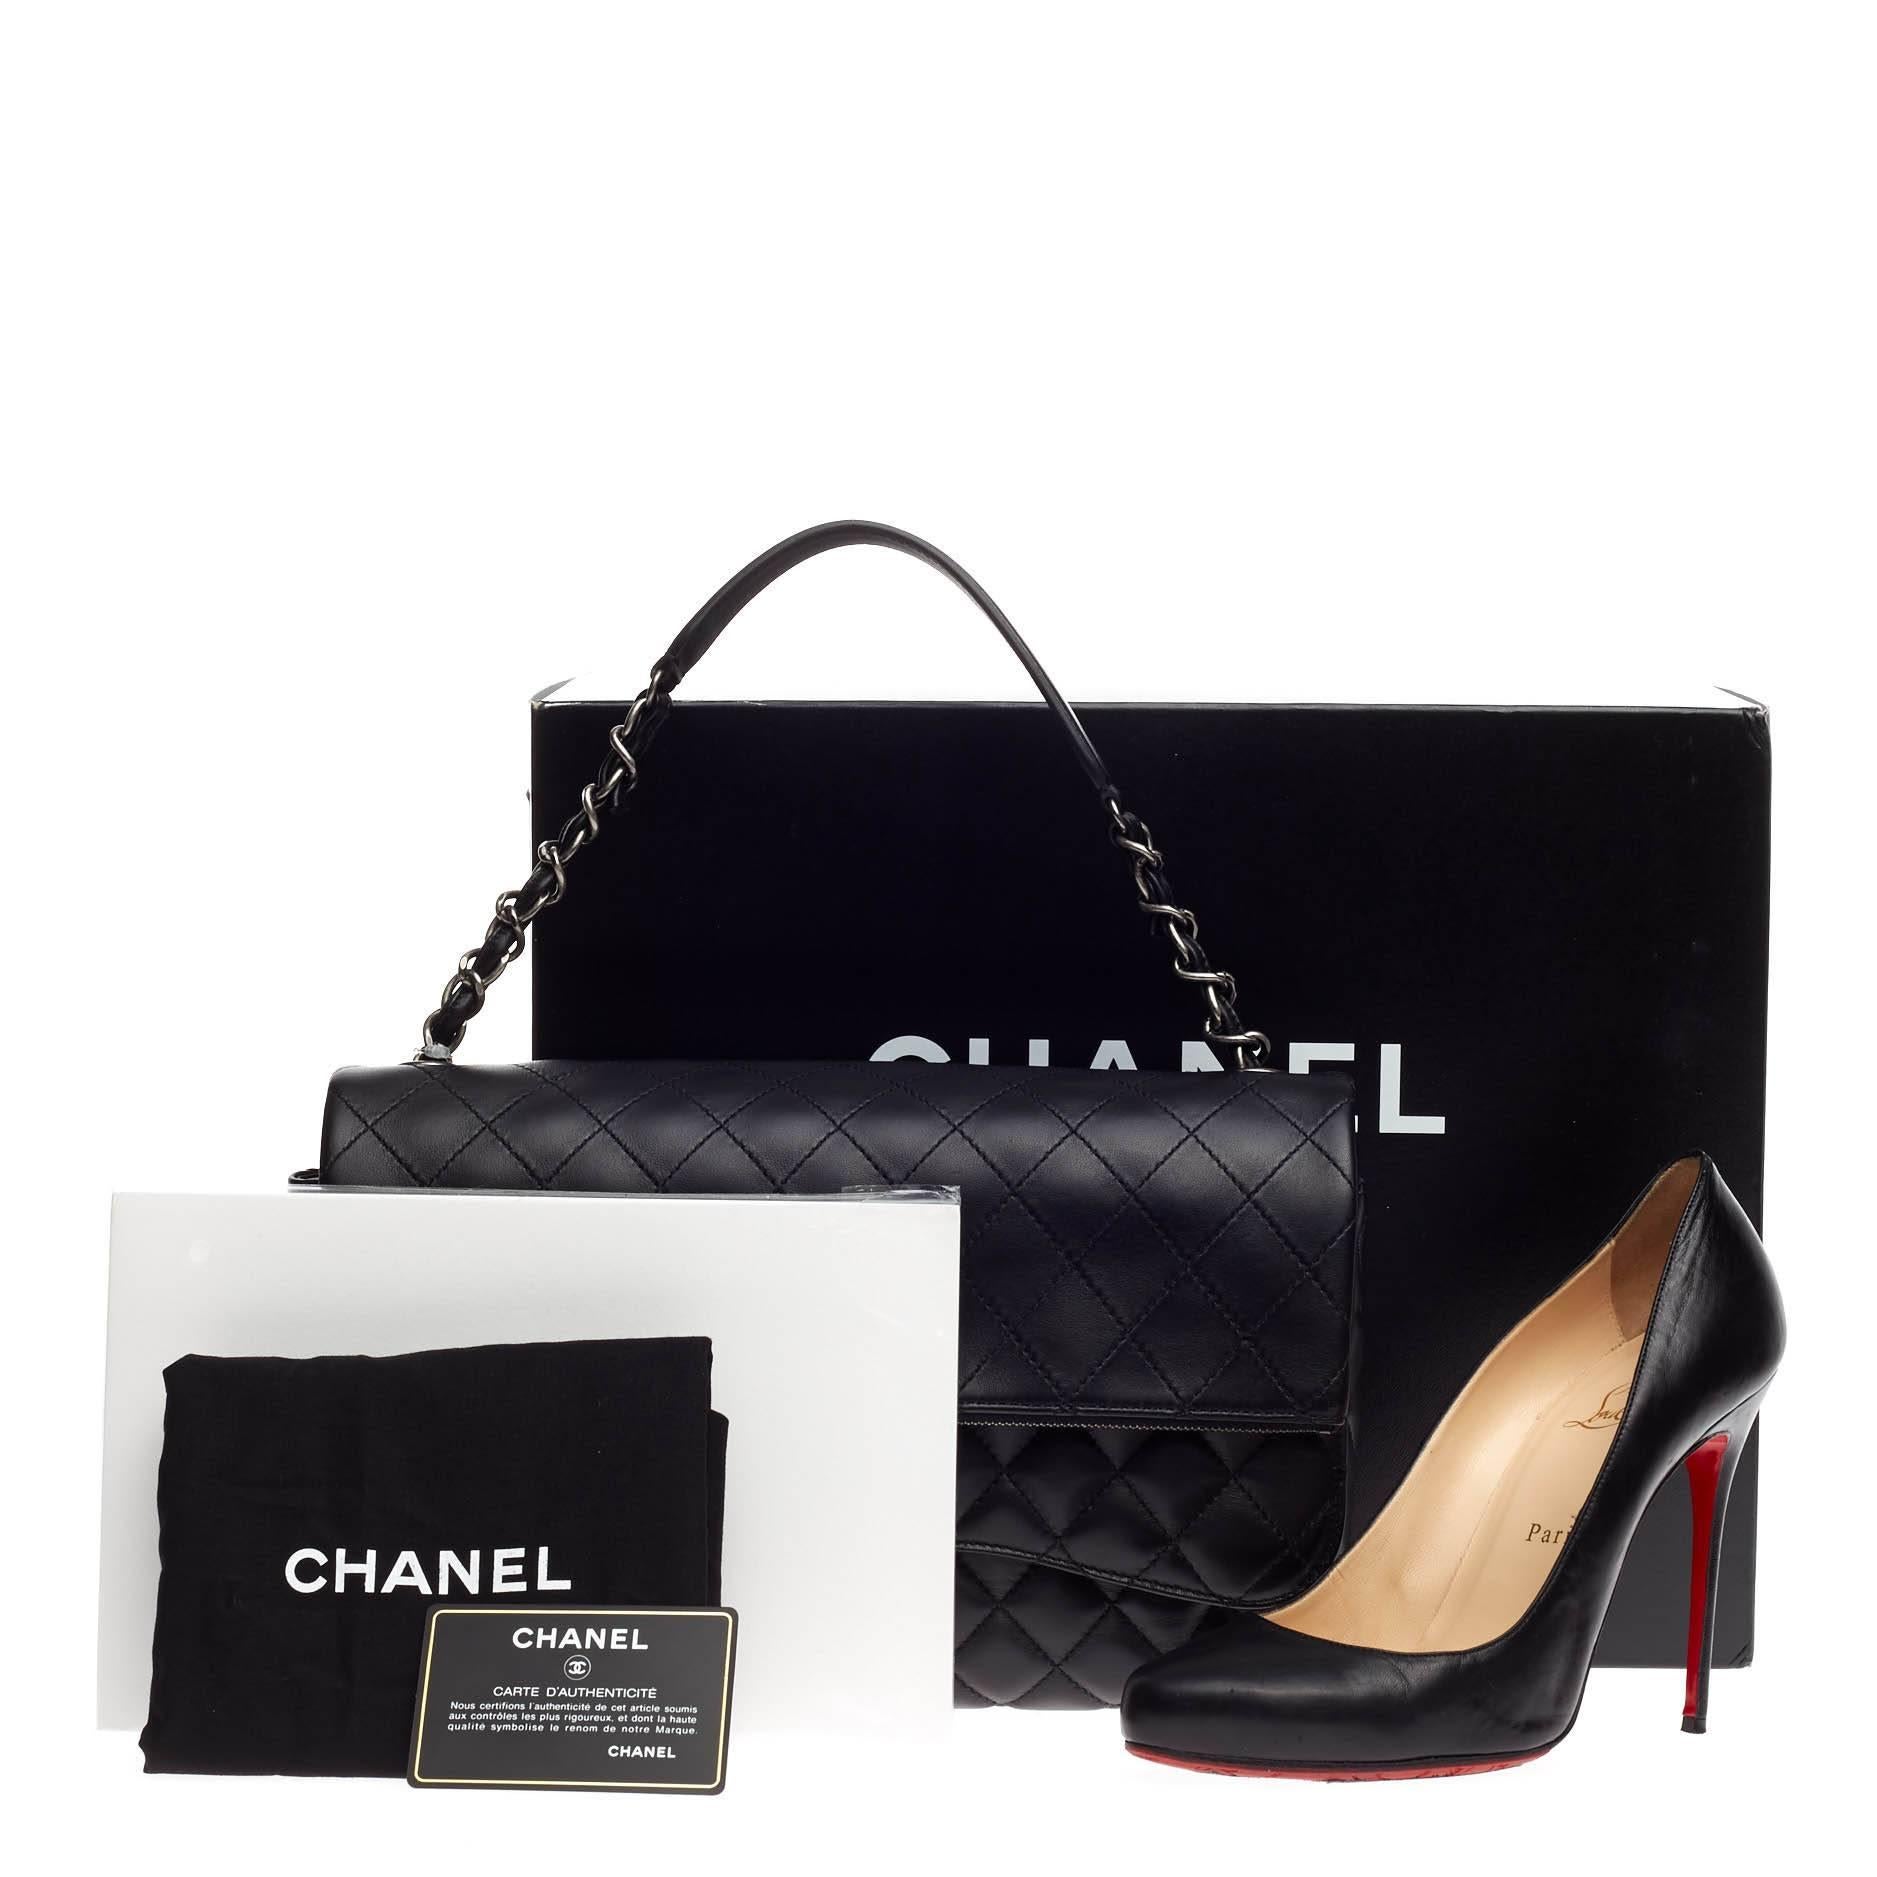 This authentic Chanel Chain Double Flap Bag Quilted Lambskin Large presented in the brand's 2015 Collection exudes a classic yet easy style made for the modern woman. Crafted from supple black lambskin leather, this elegant flap features Chanel's